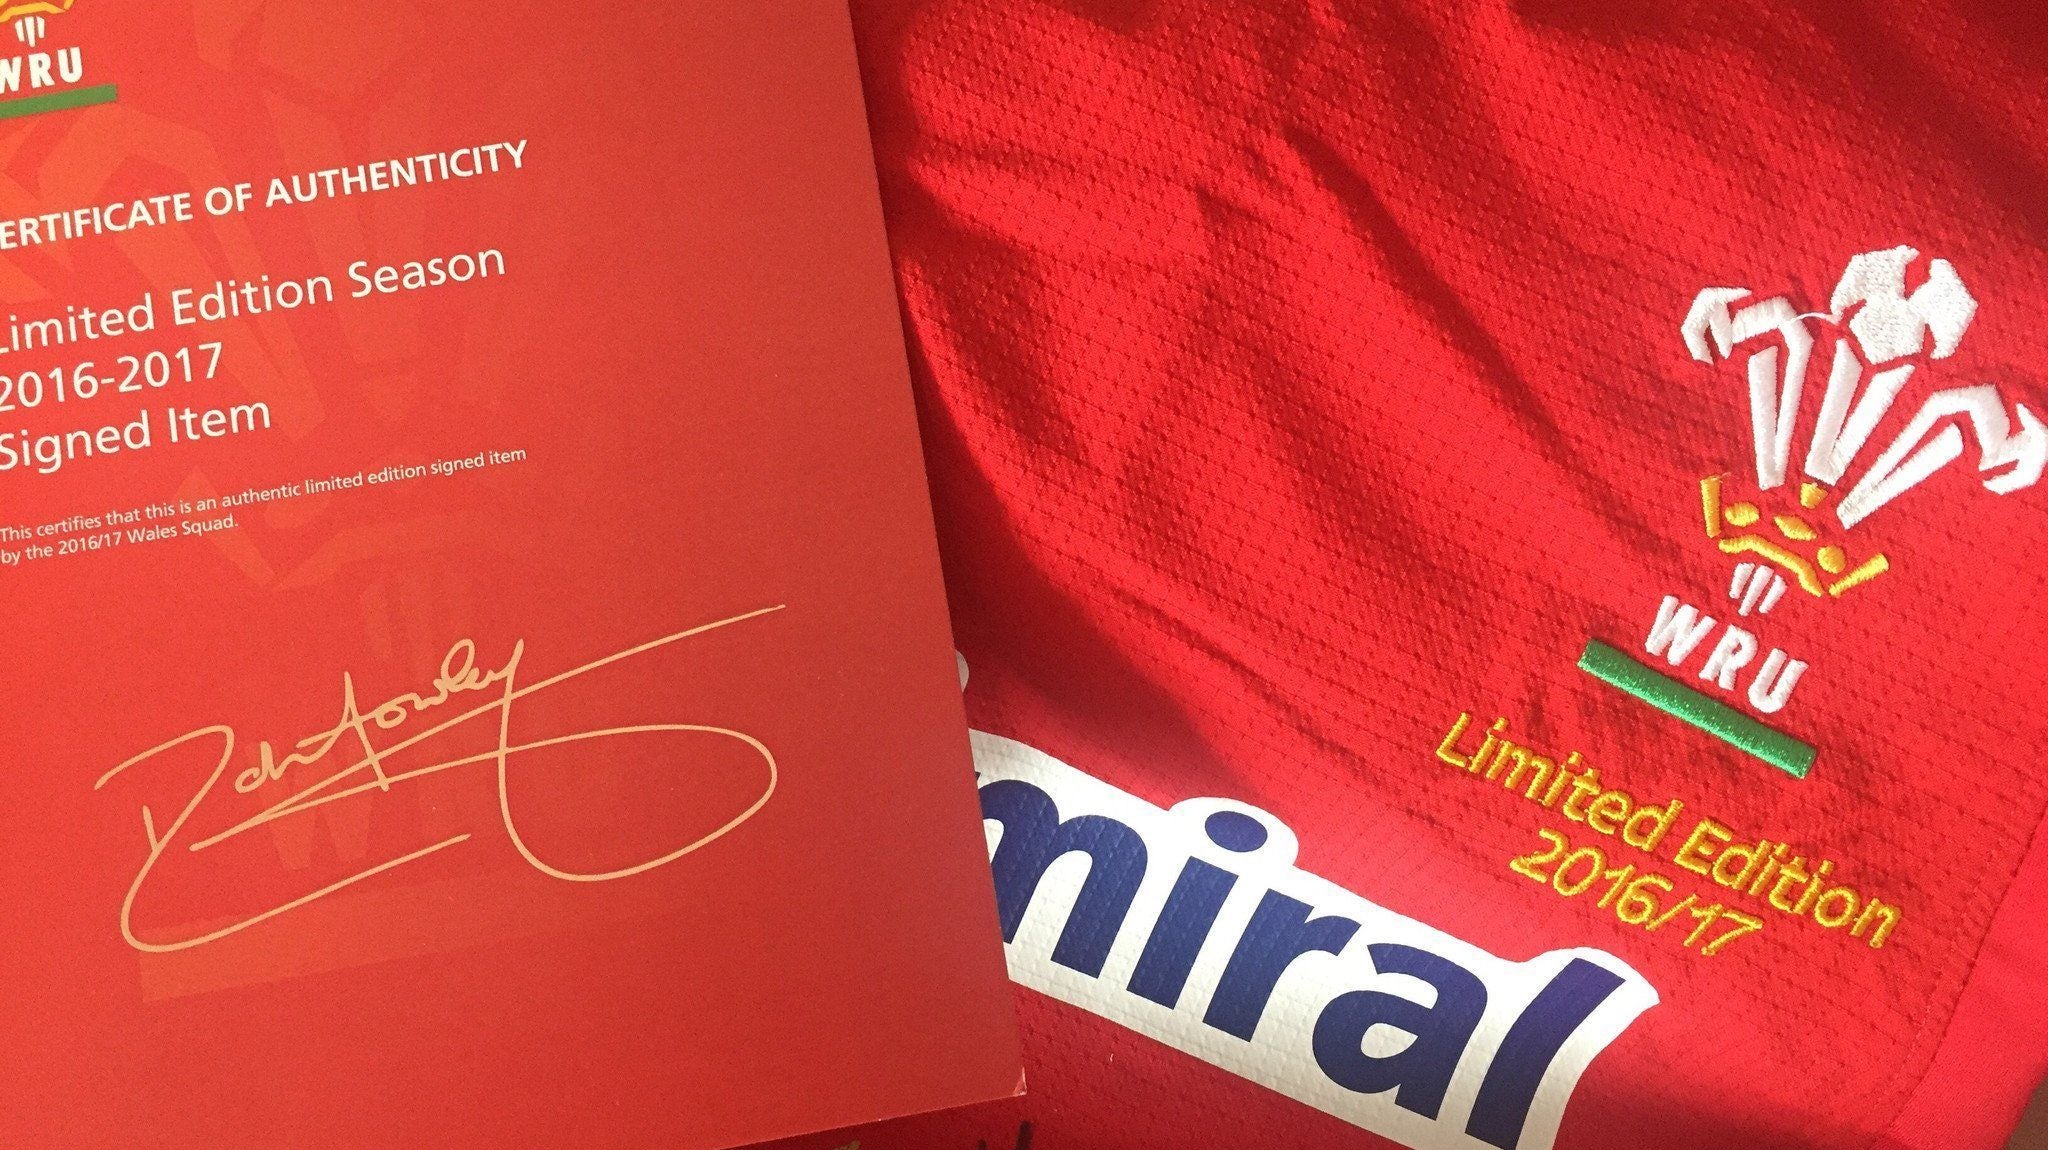 Win a shirt signed by the 36-man 2016-17 Welsh rugby union squad!